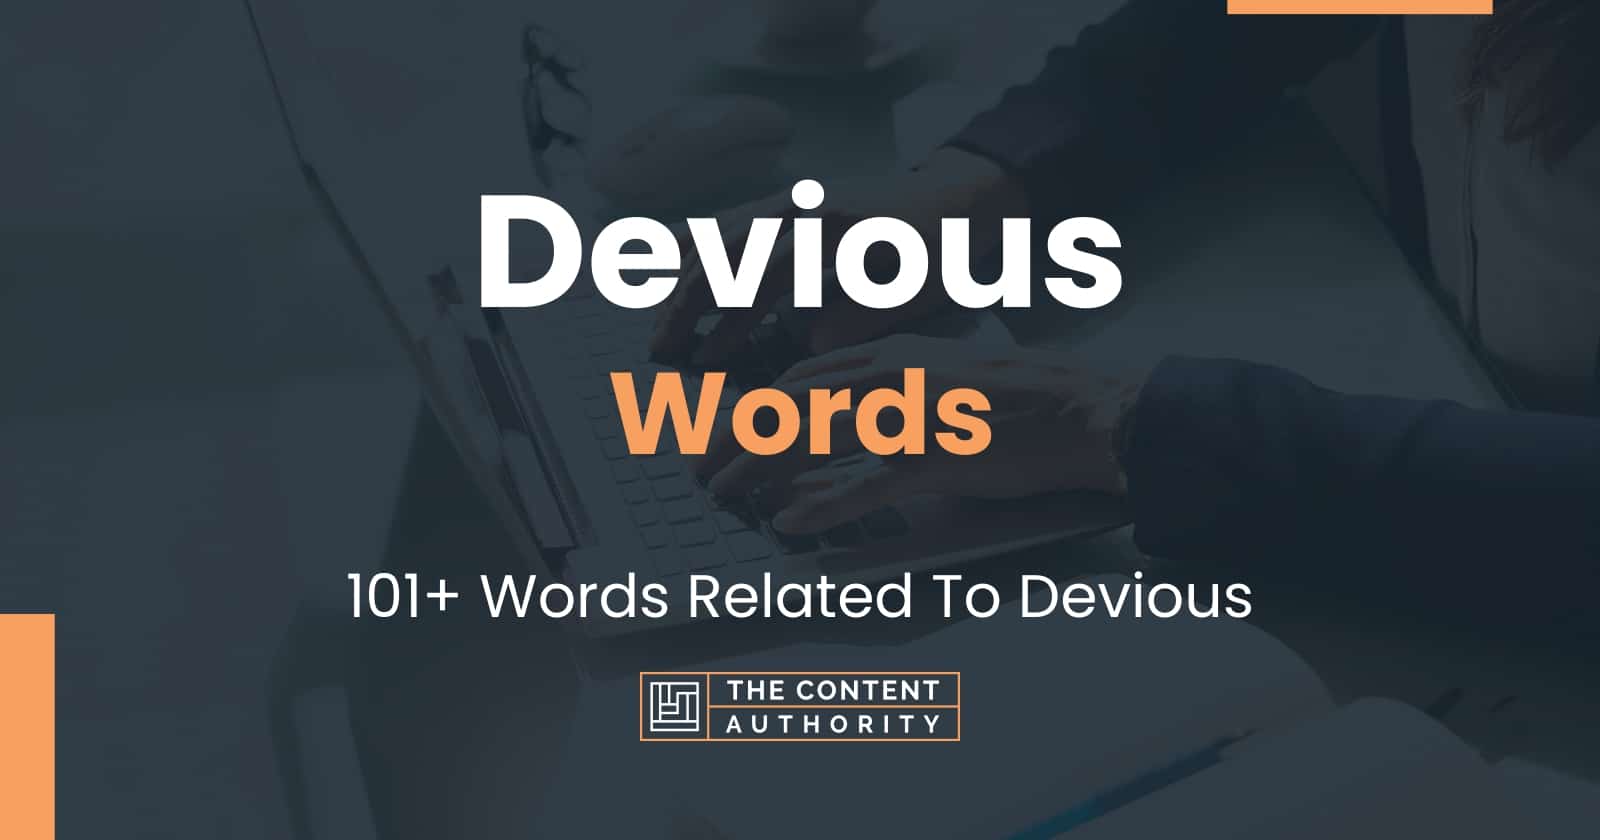 Devious Words 101 Words Related To Devious